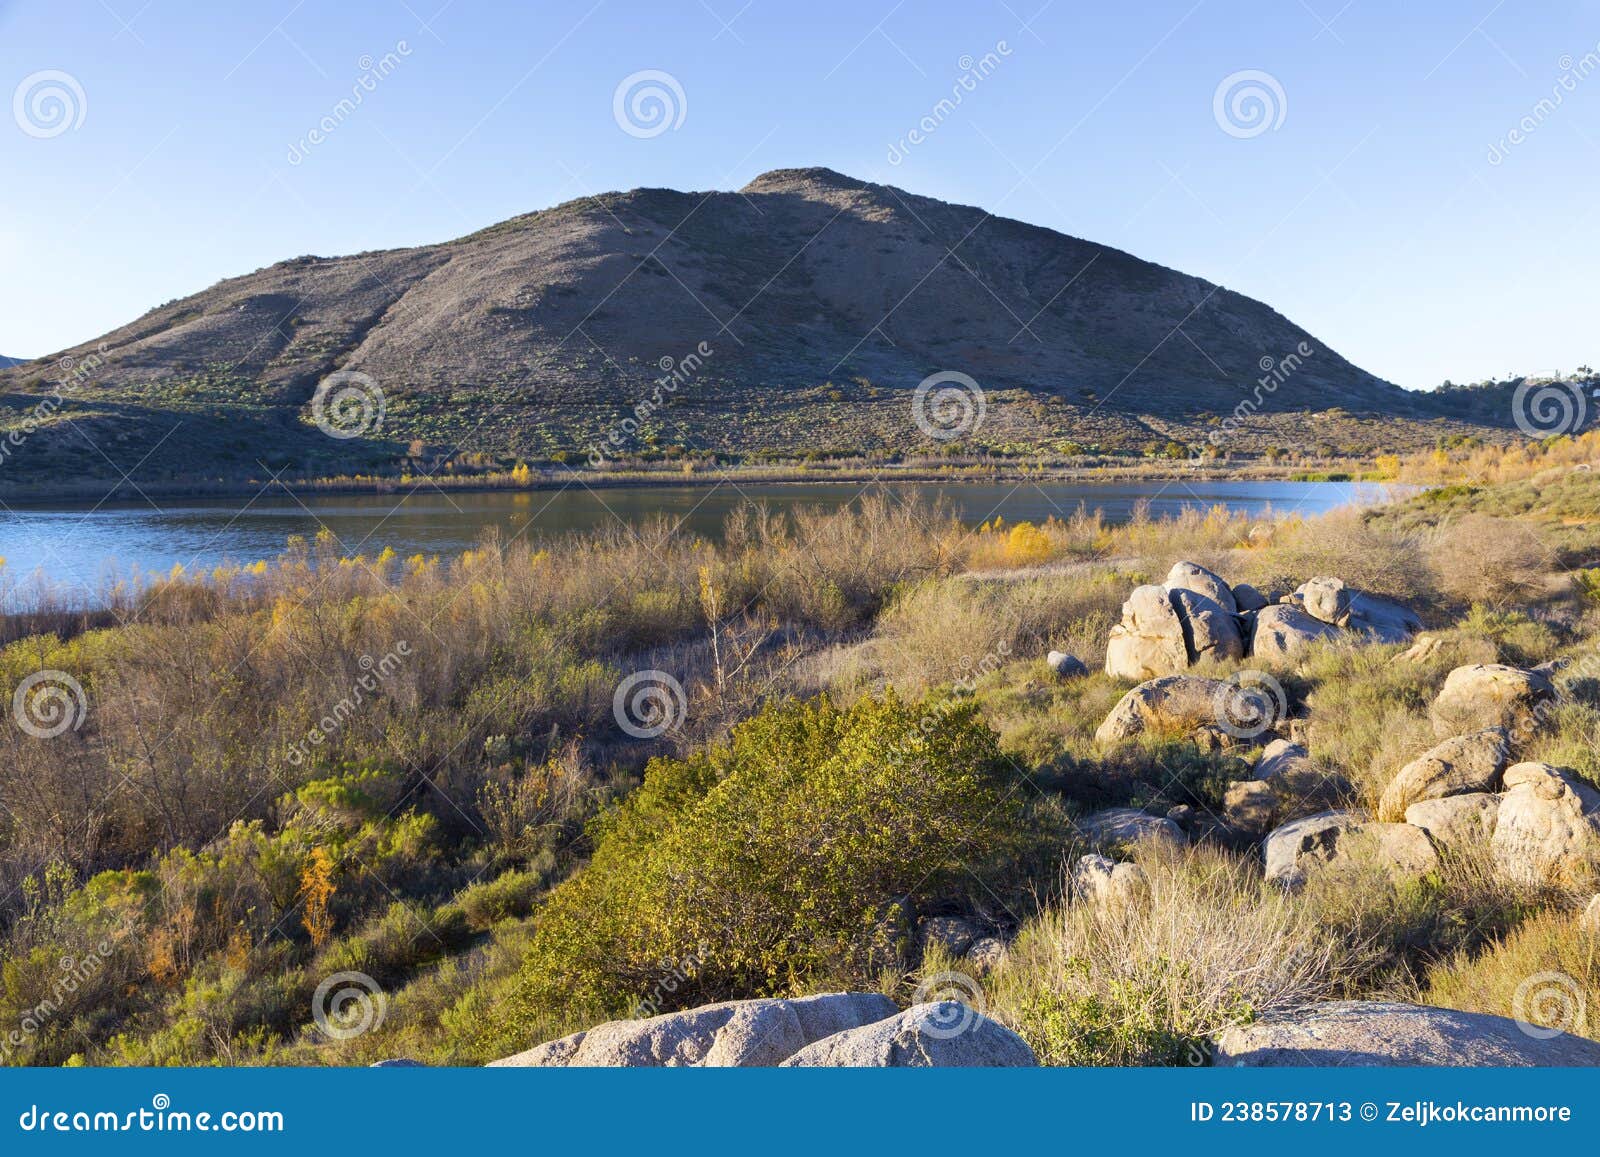 scenic landscape at lake hodges with bernardo mountain on a hiking trail